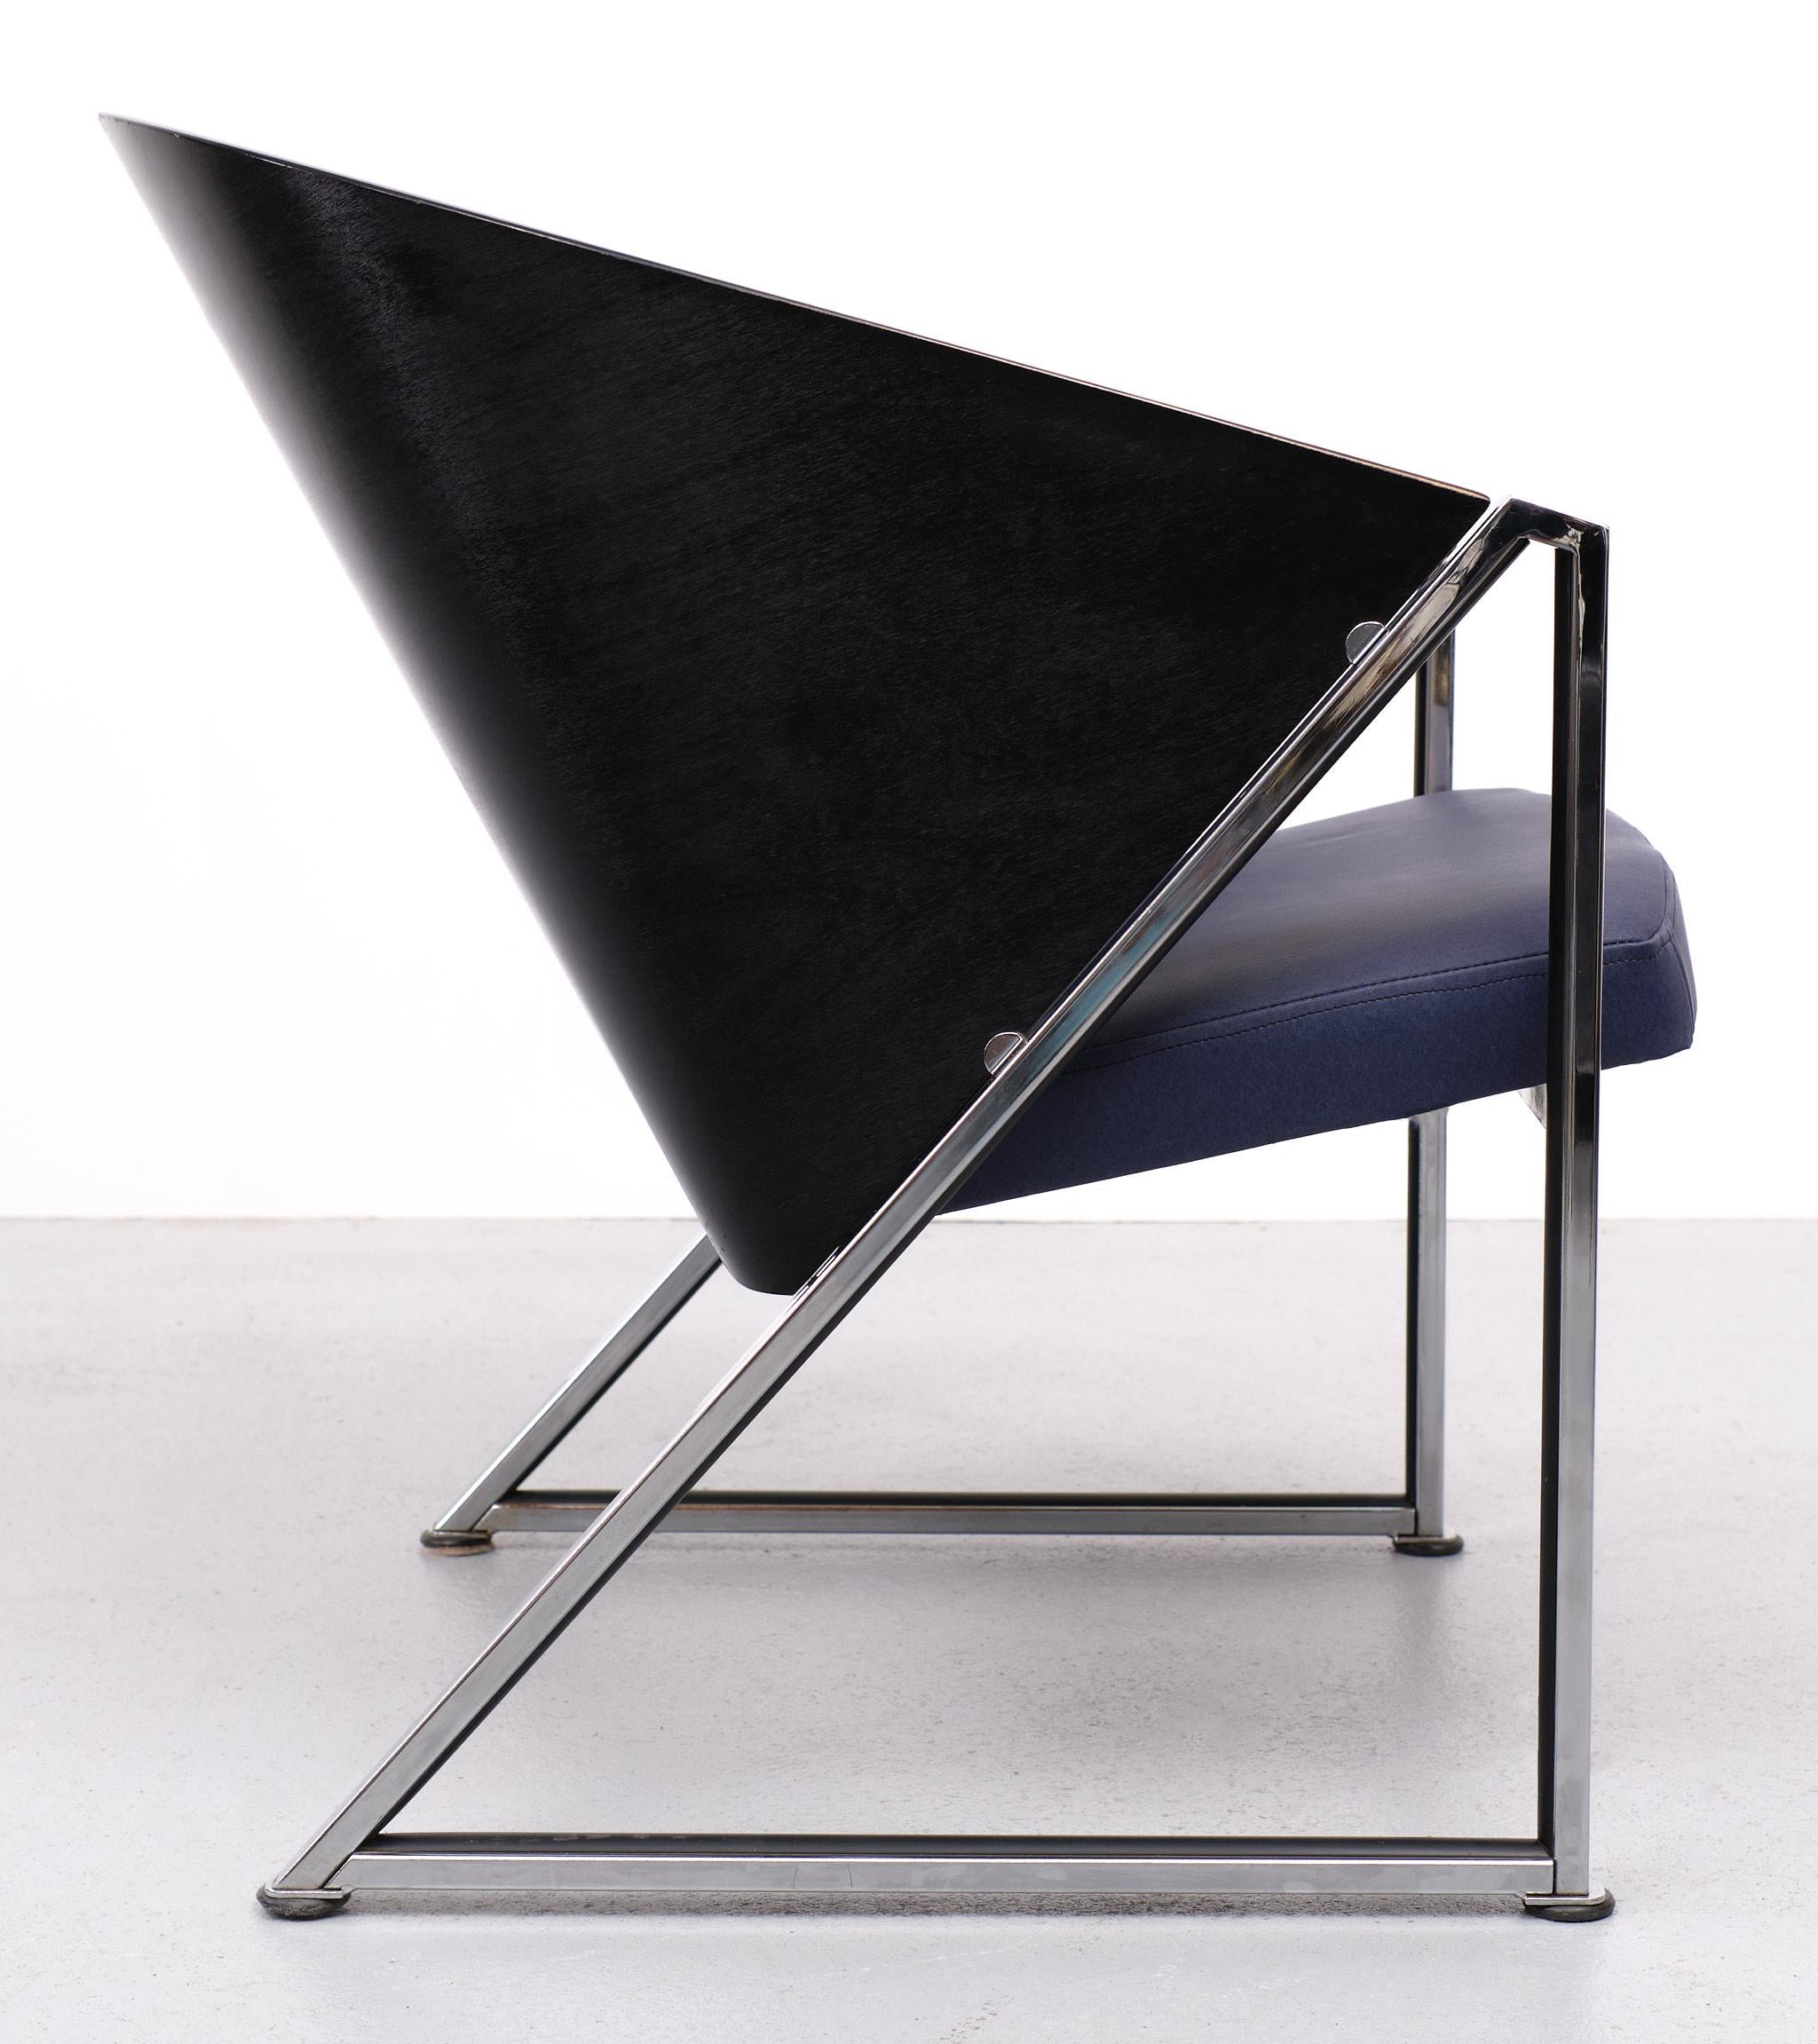 Late 20th Century Mondi Soft Chair by Jouko Jarvisalo for Inno OY, Finland, 1980s For Sale